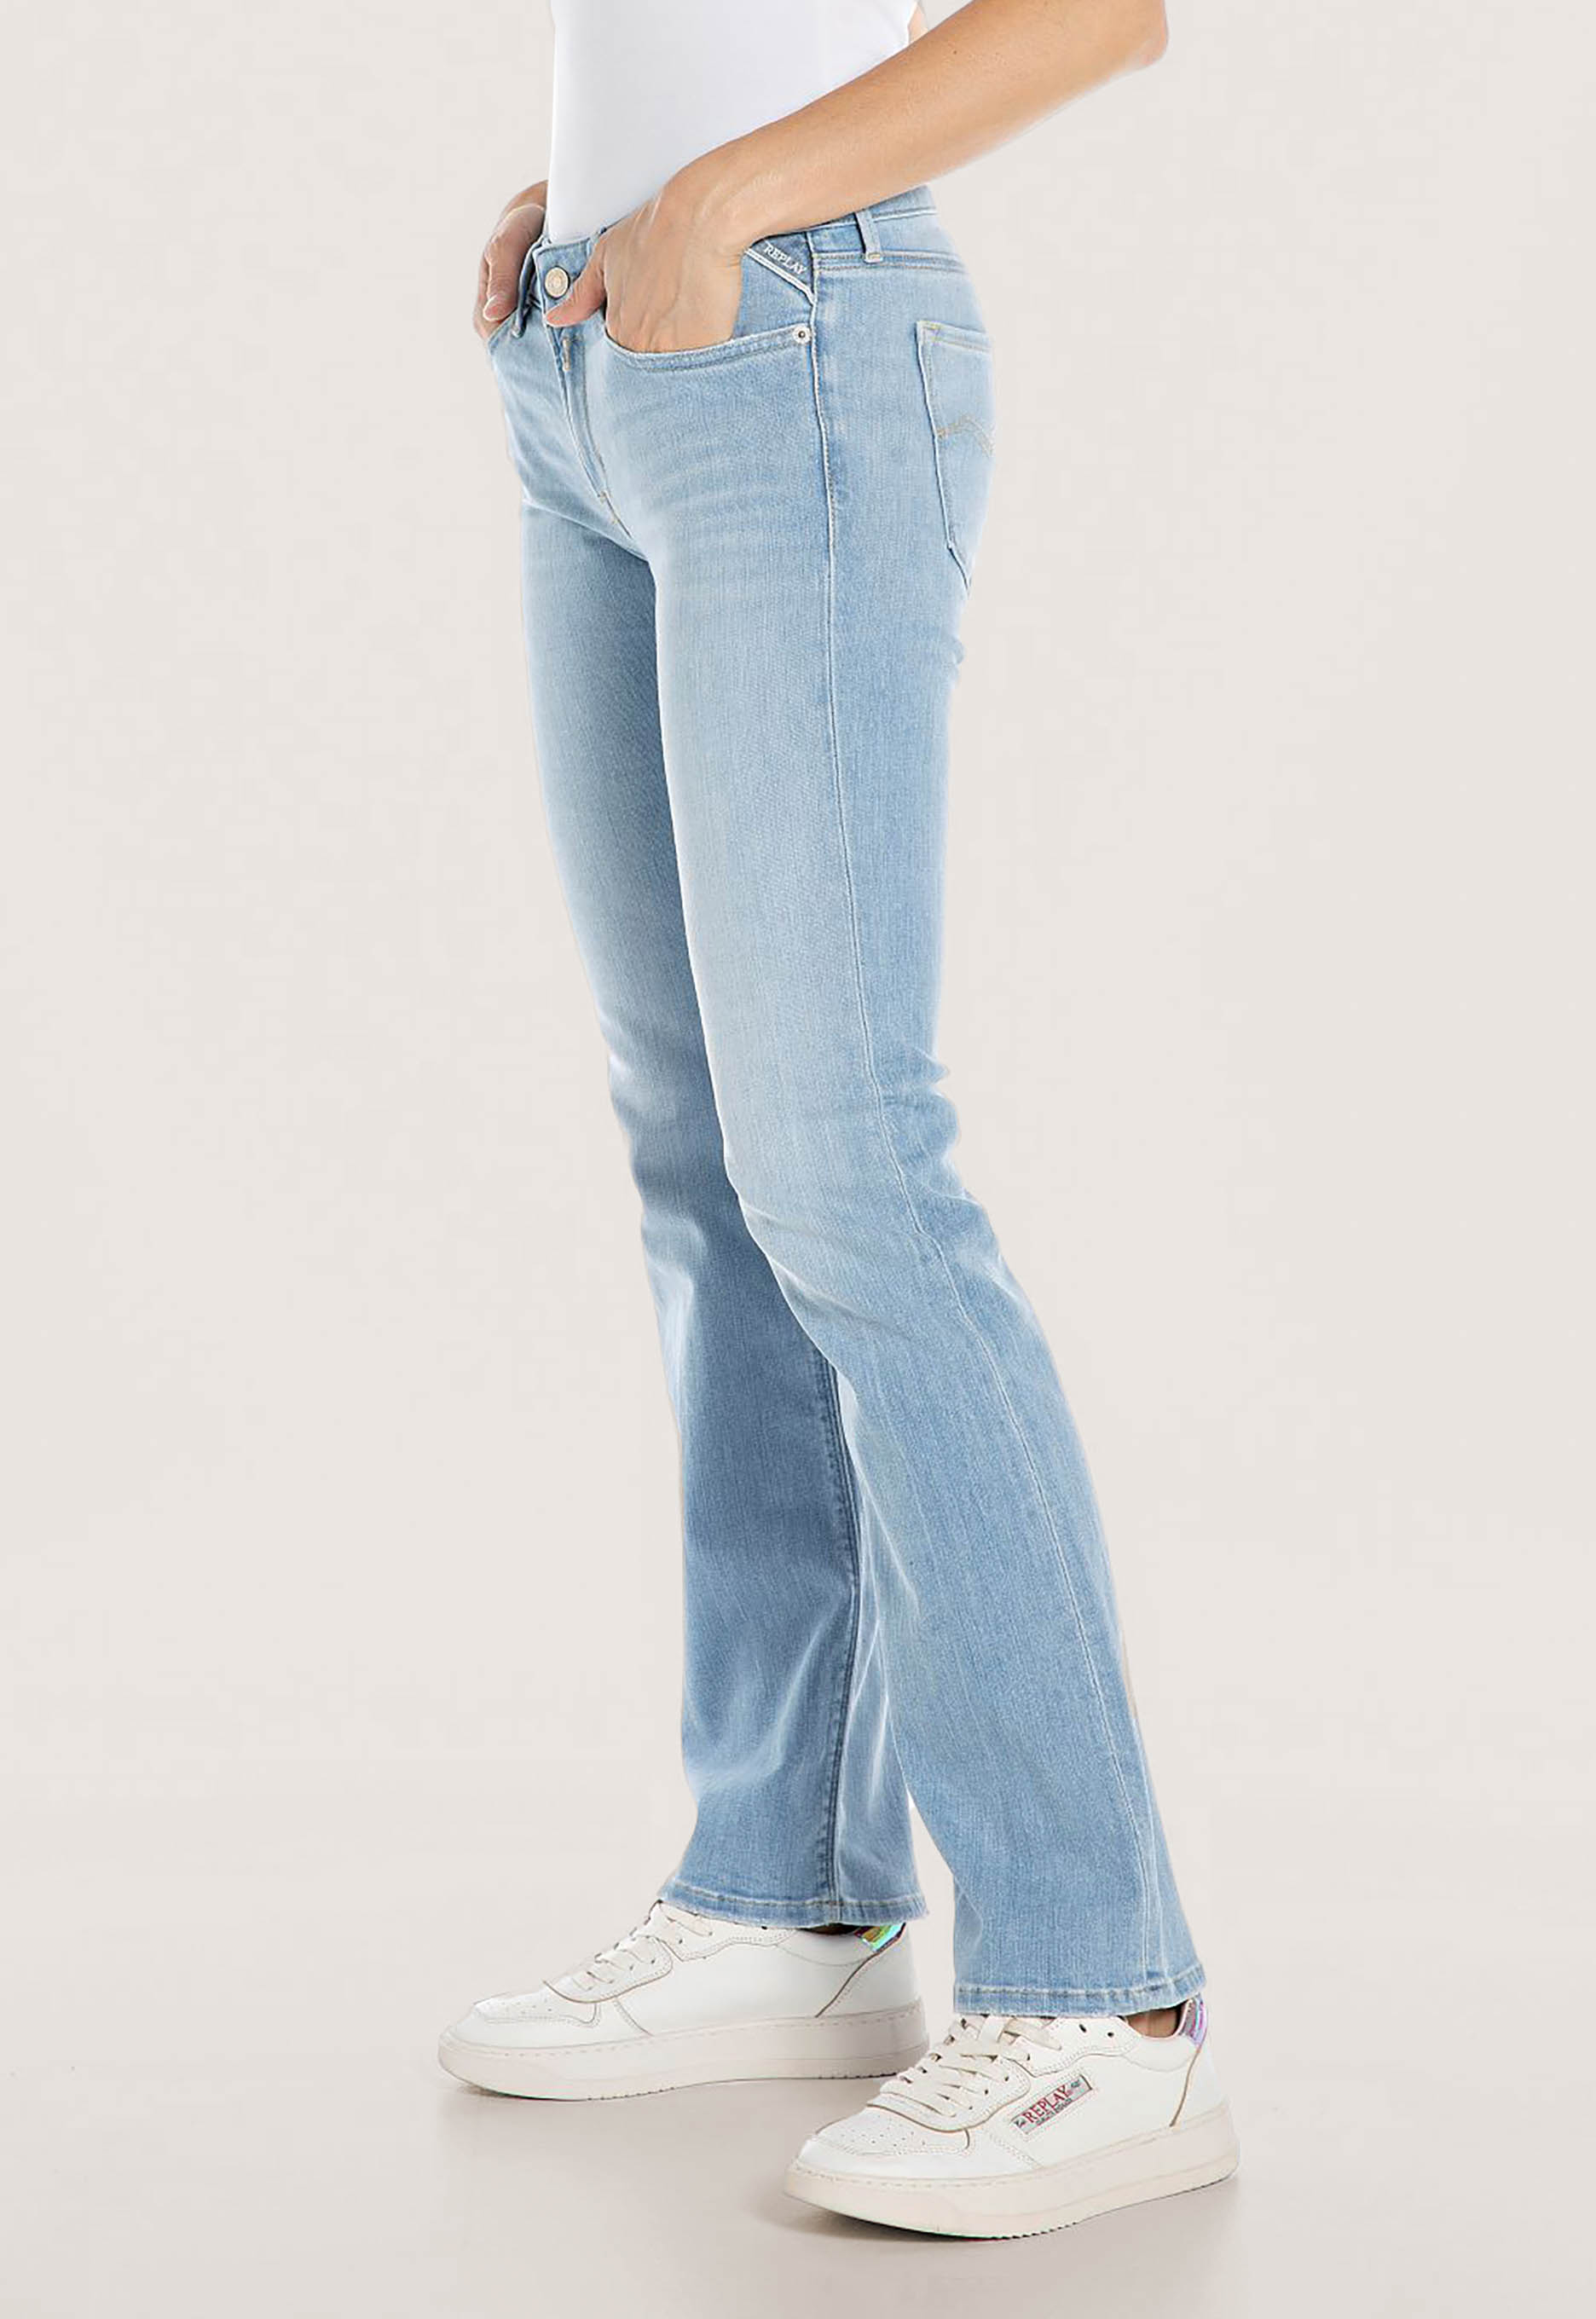 Replay New Luz Bootcut Jeans